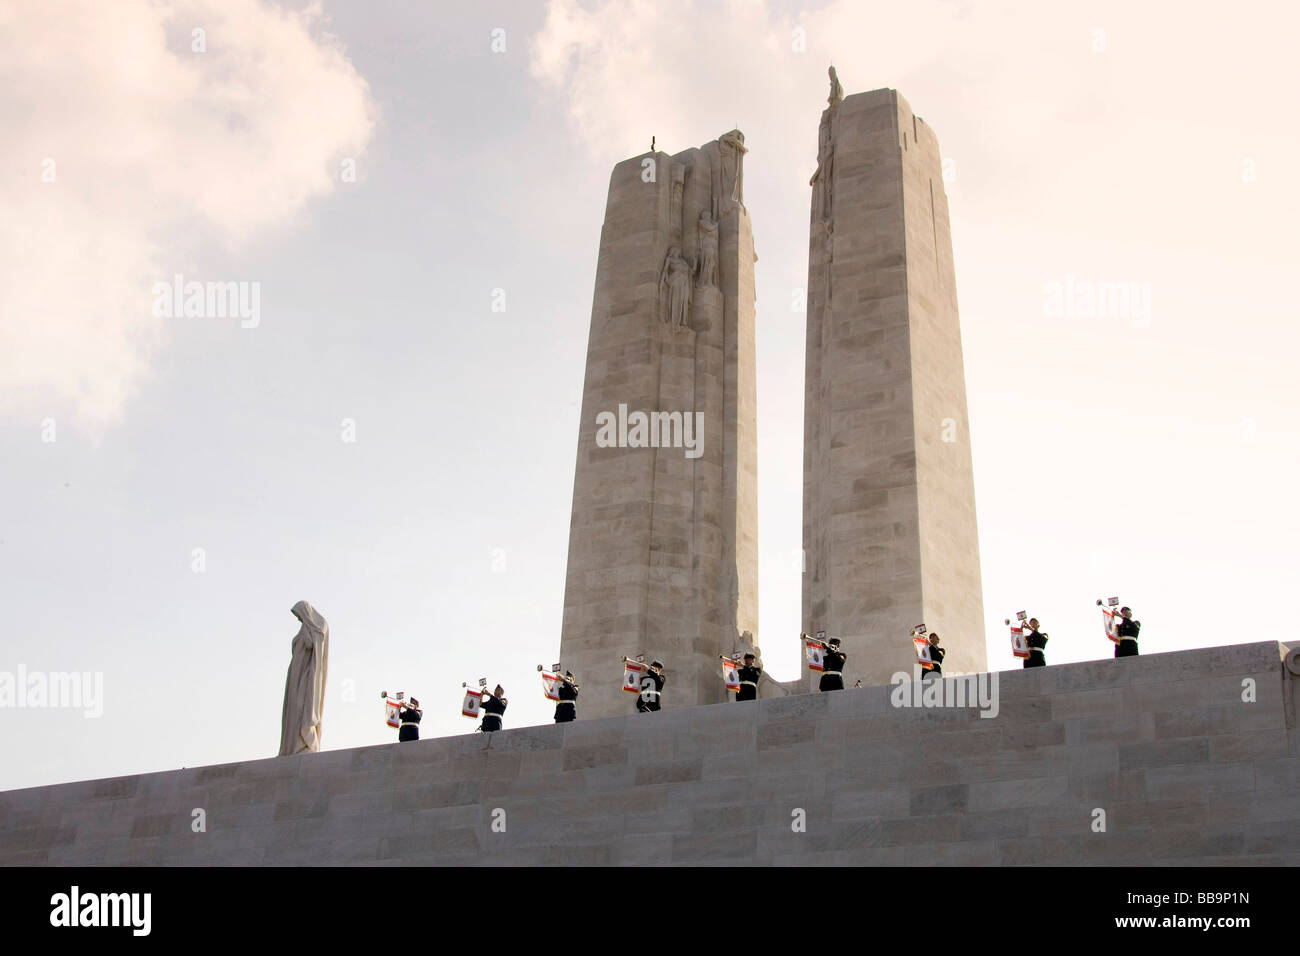 The Canadian Armed Forces WW1 memorial at Vimy Ridge, France Stock Photo